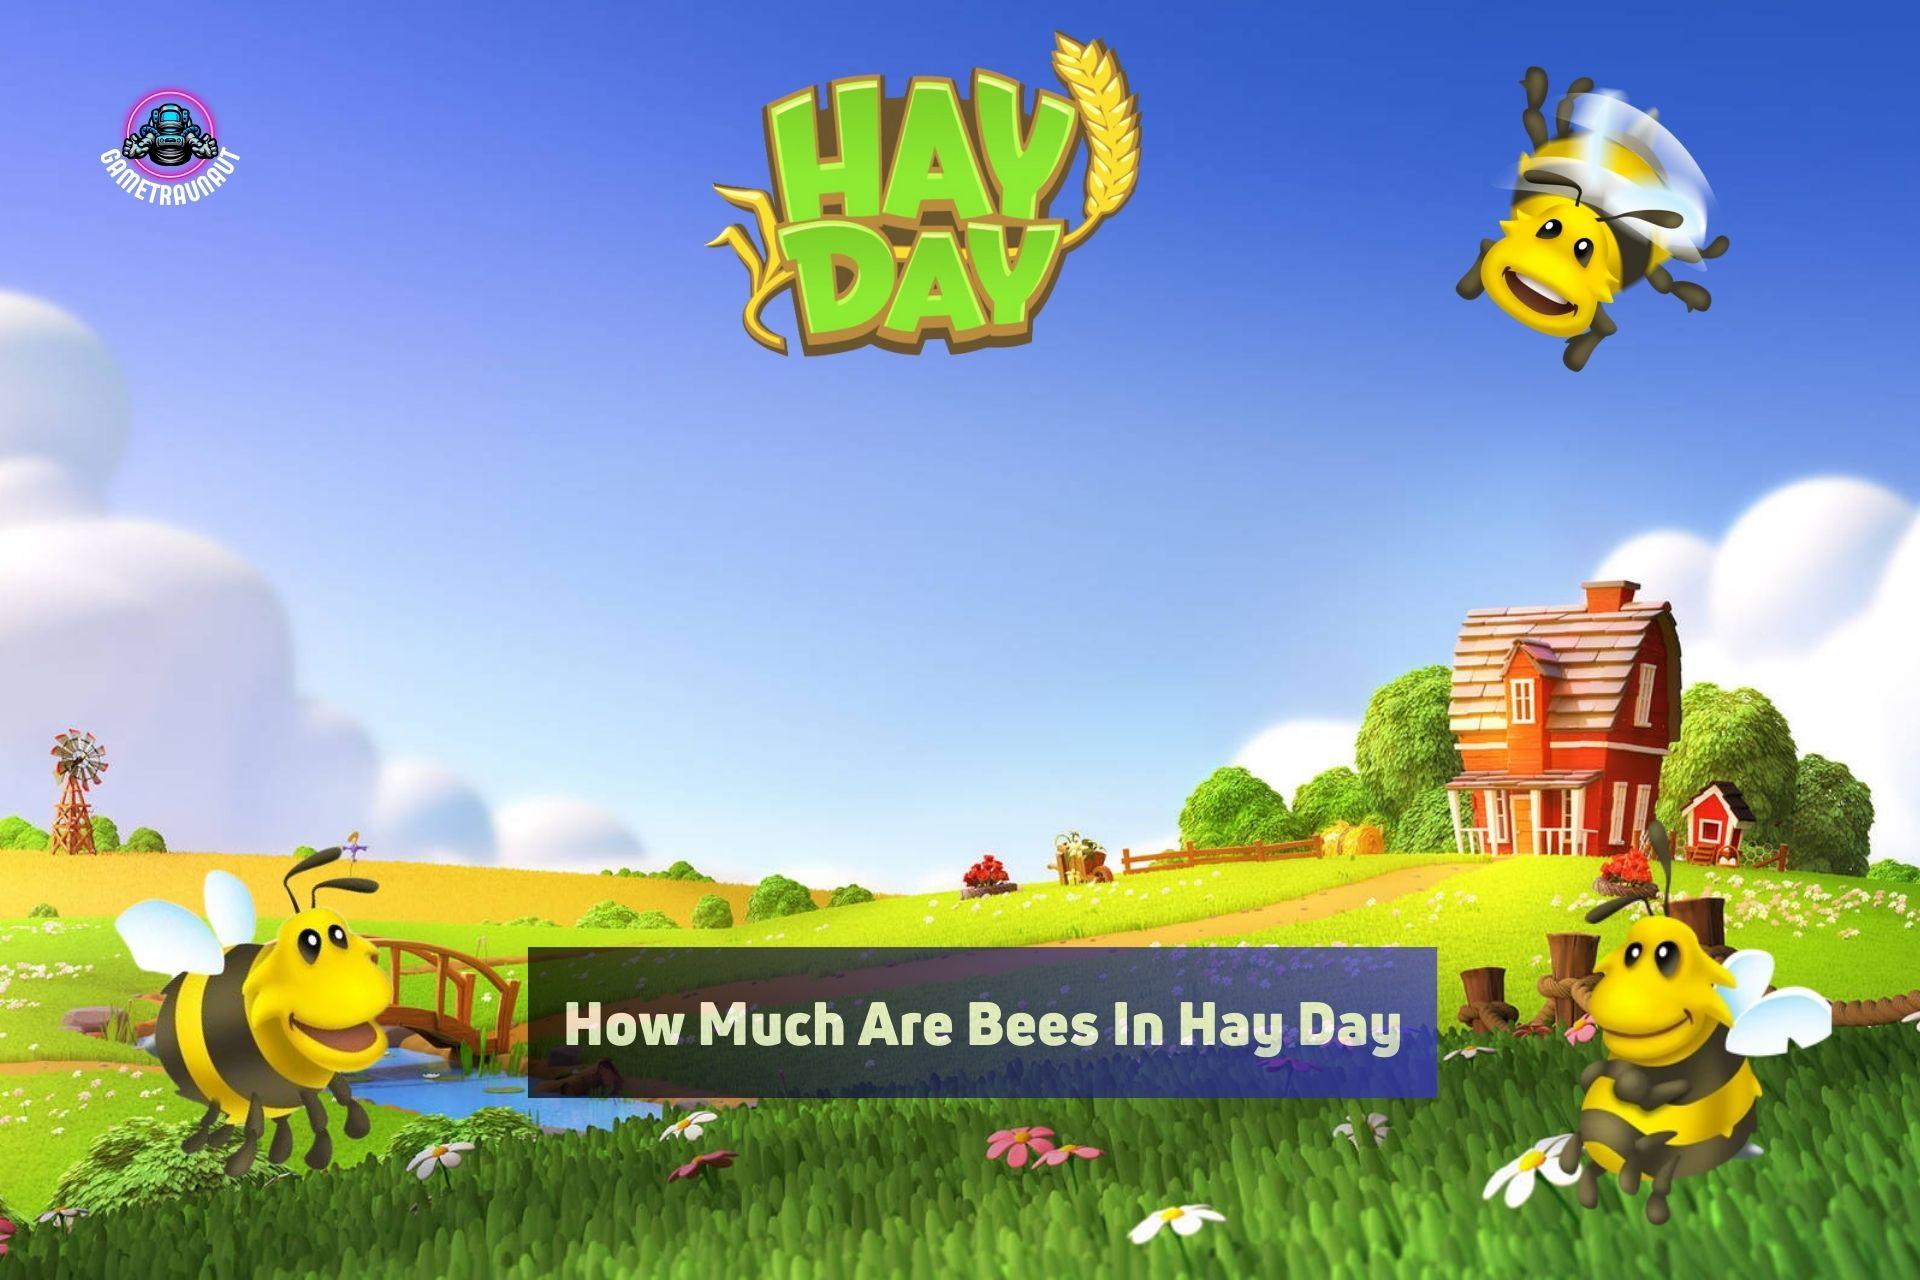 How Much Are Bees In Hay Day